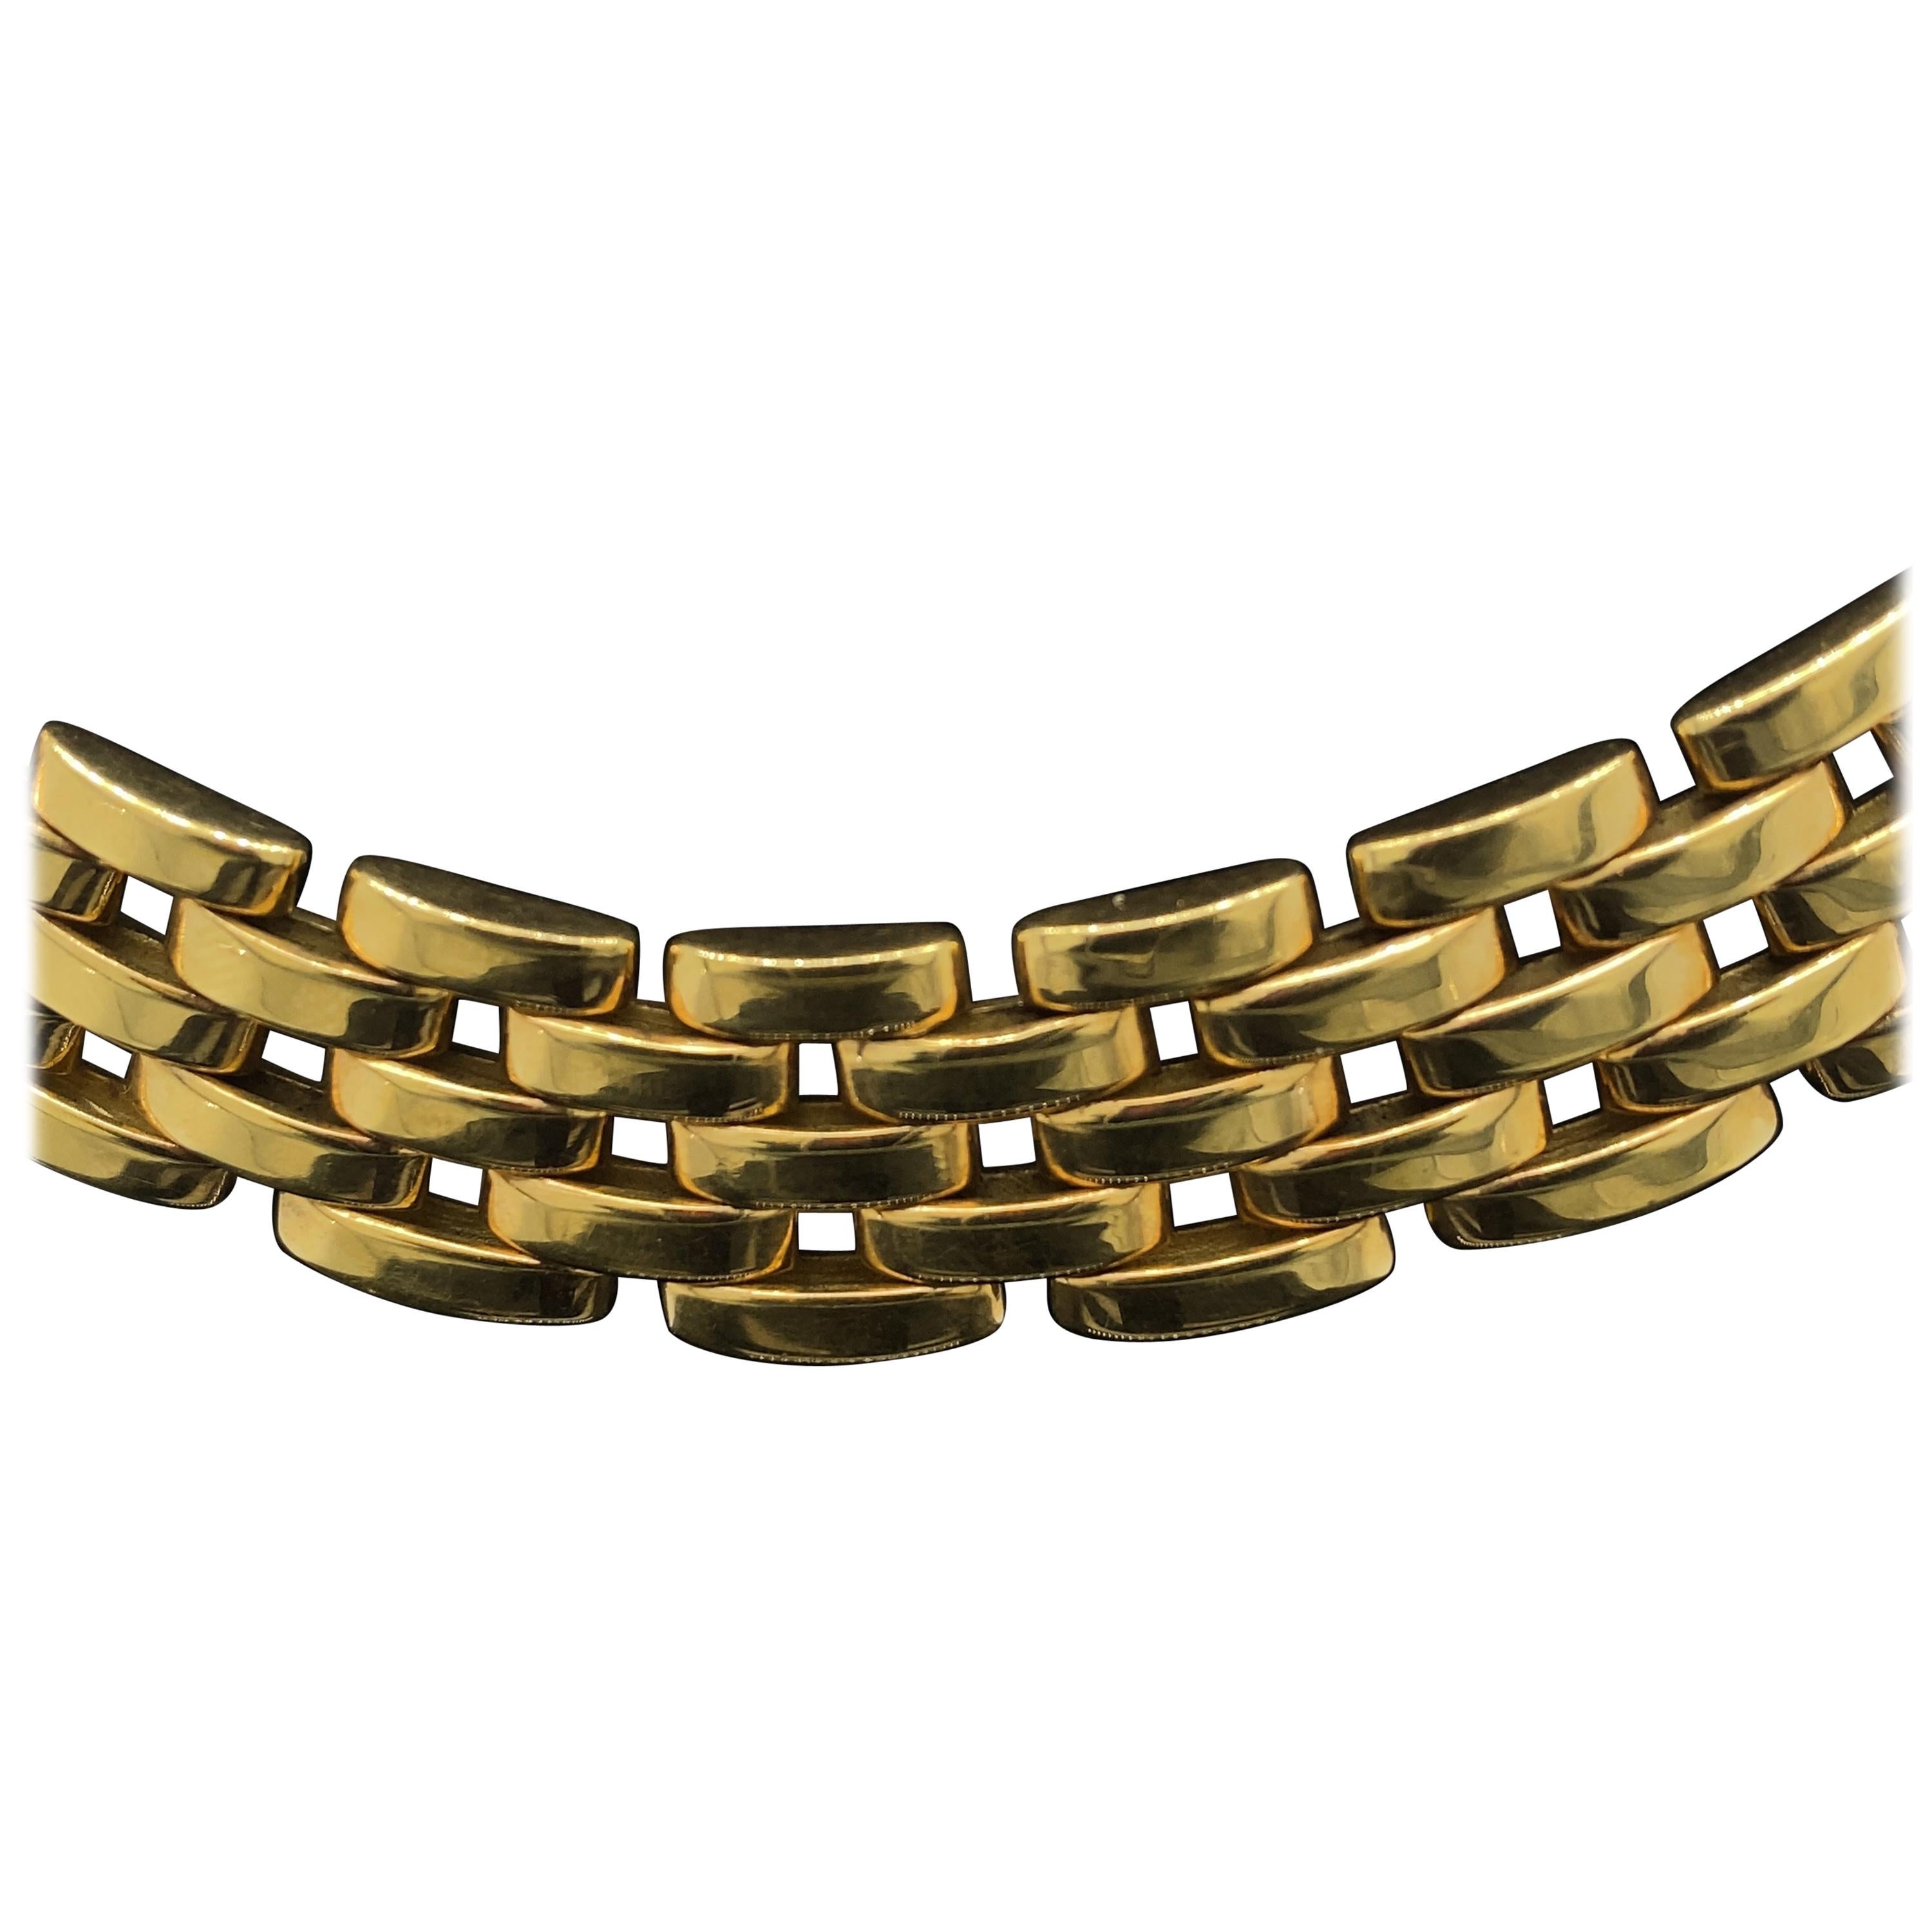 Cartier Maillon Panthere Five-Row Yellow Gold Necklace